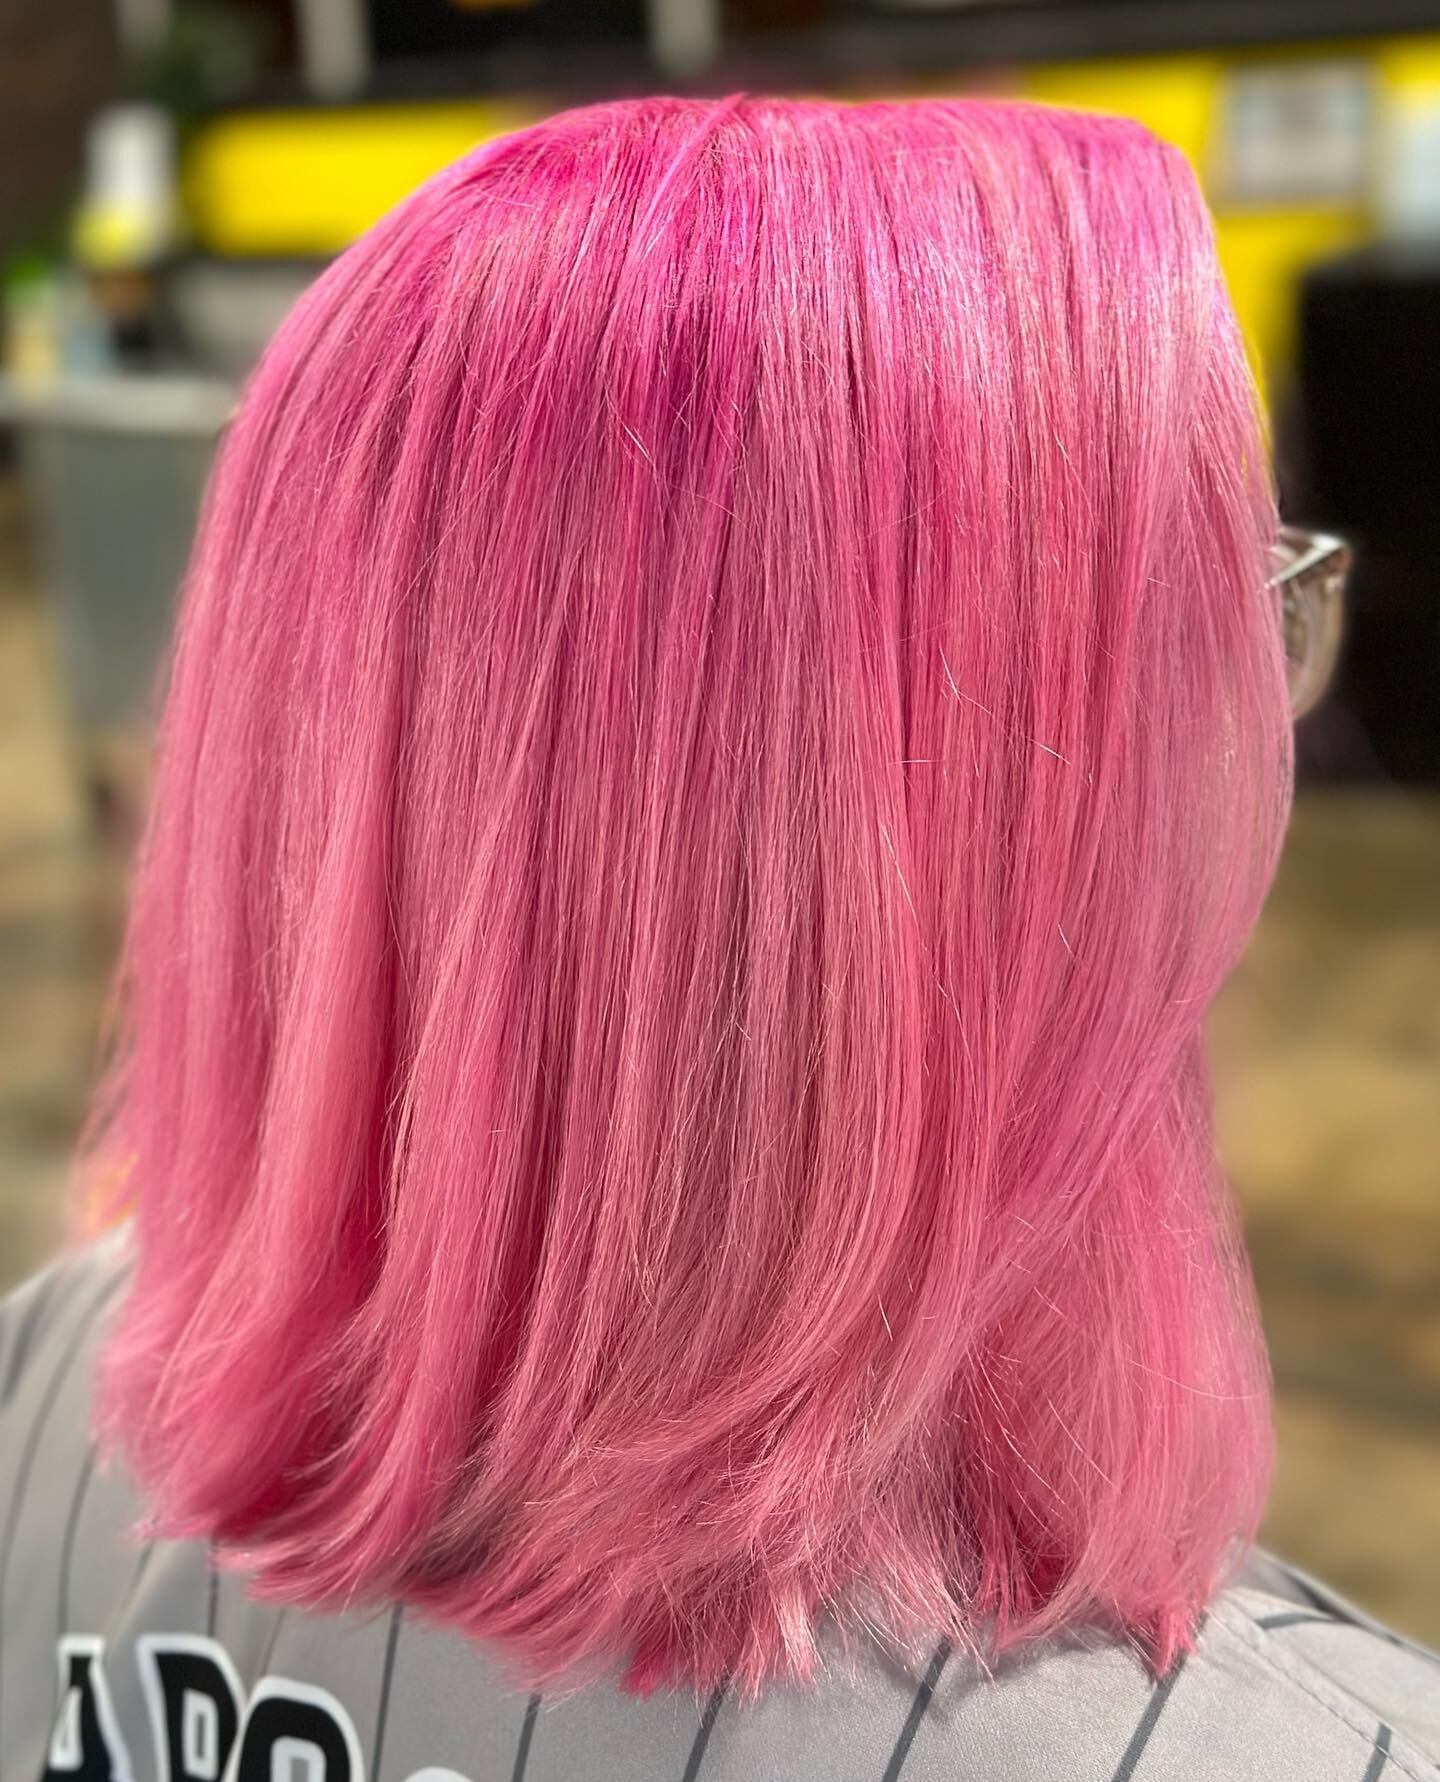 In honor of Barbie movie tickets going on sale this week, I present to you the perfect Barbie hair. 
#barbiemovie #pinkhair #summerhairtrends #stylesbysluss #vividhaircolor #columbiasc #fivepointscolumbia #scstylist #columbiahairstylist